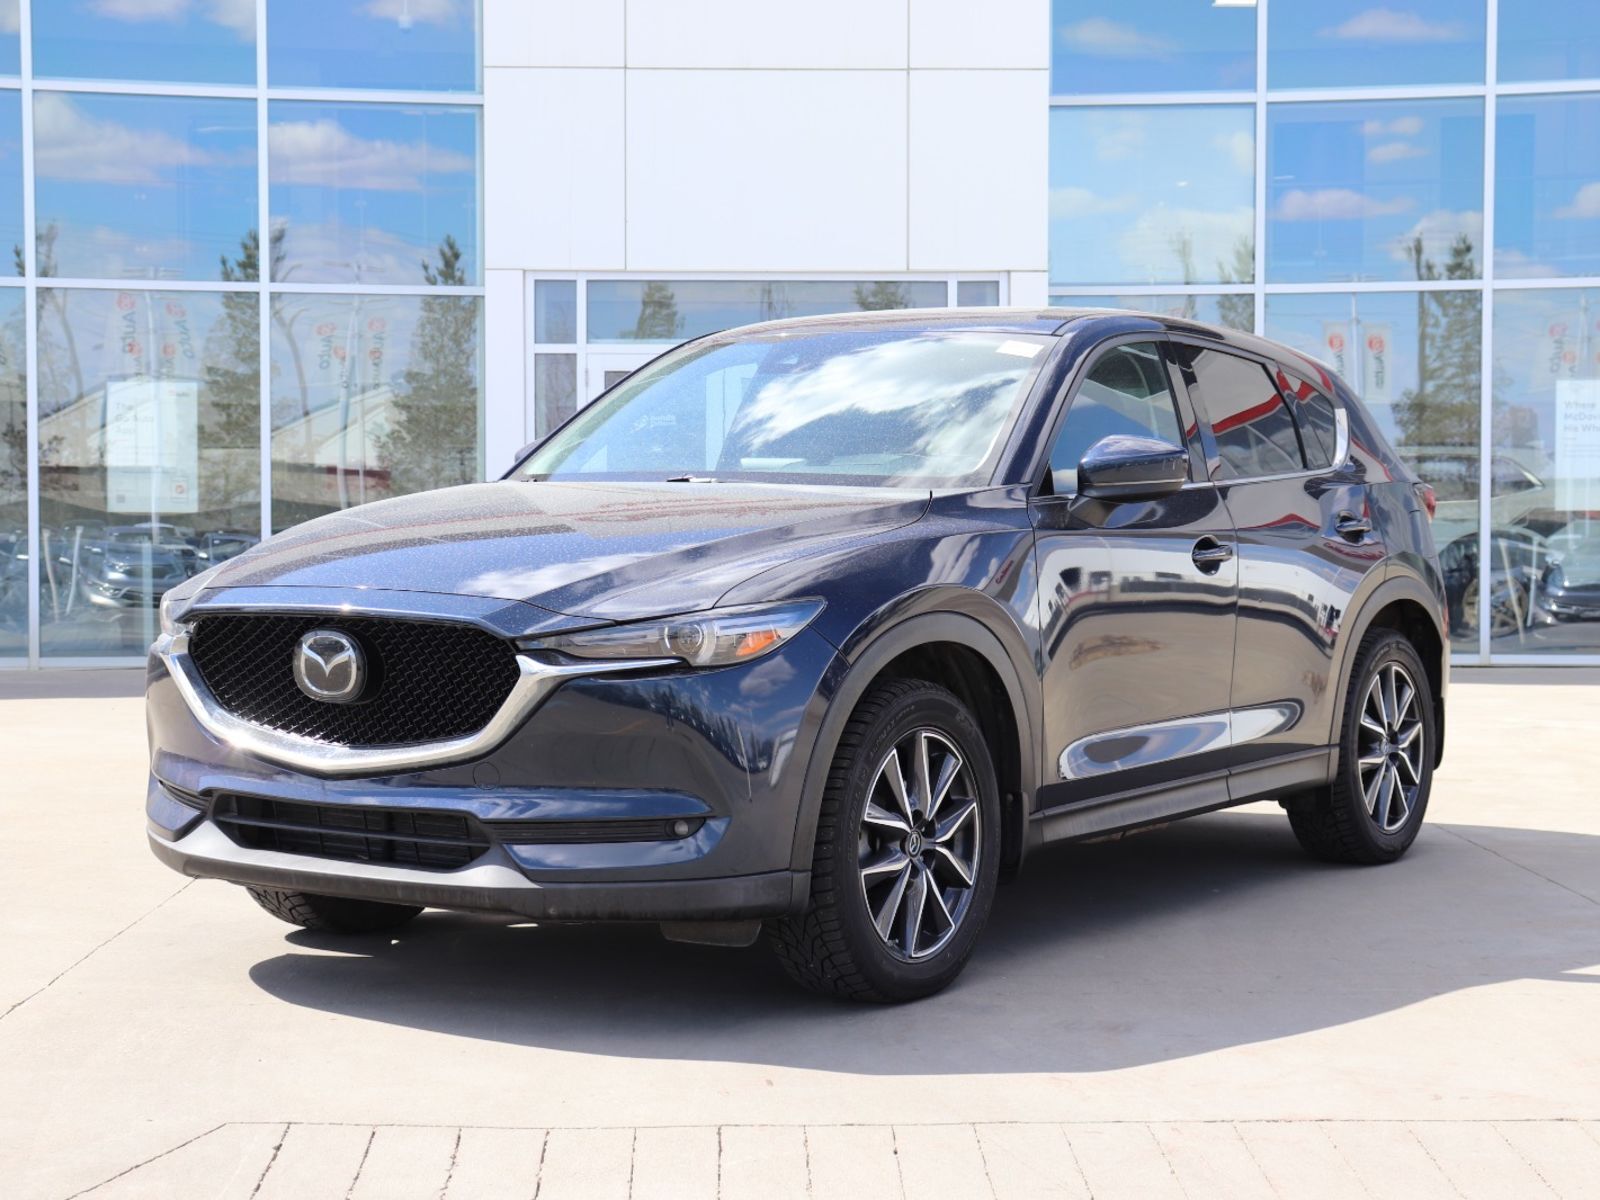 2017 Mazda CX-5 GRAND TOURING AWD ONE OWNER NO ACCIDENTS!